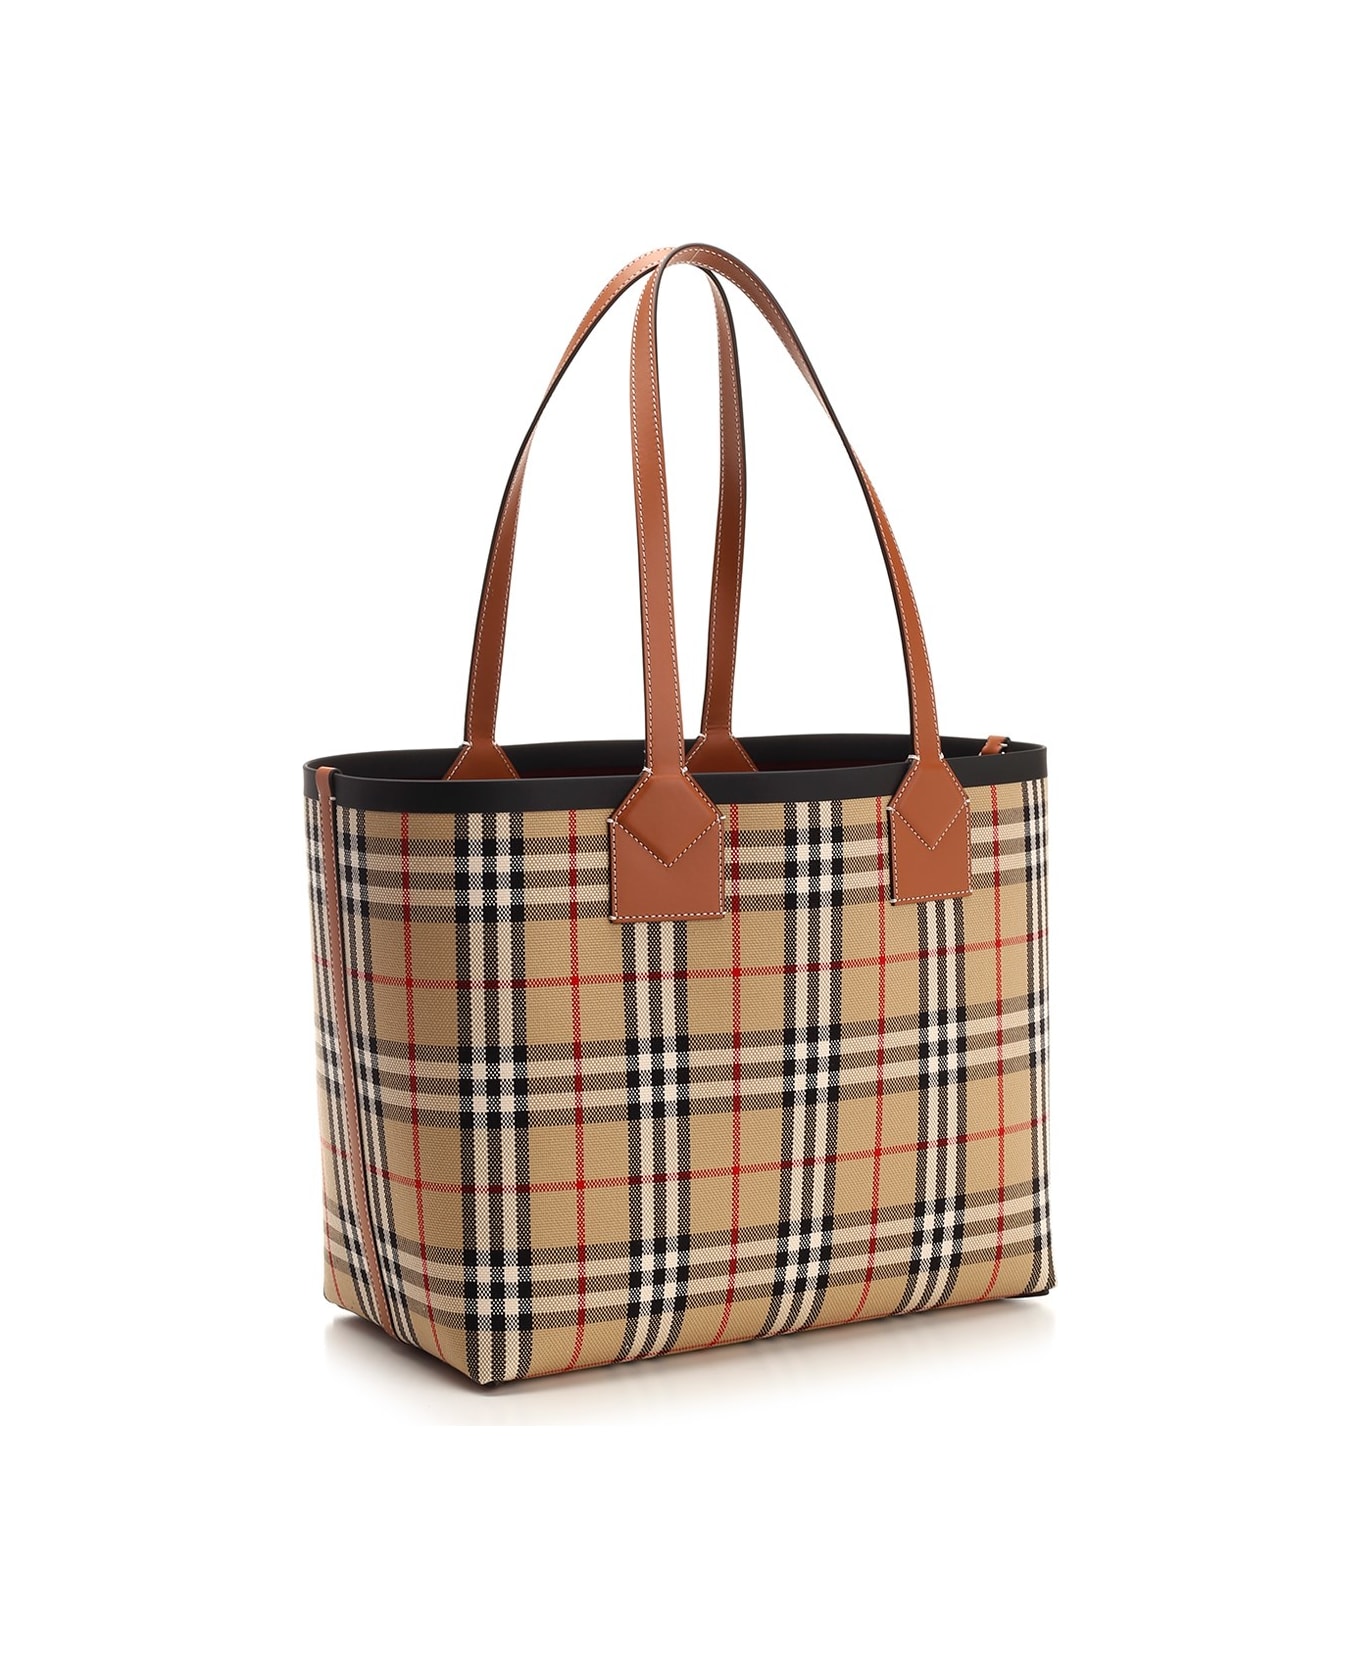 Burberry 'london' Small Tote Bag - Beige トートバッグ